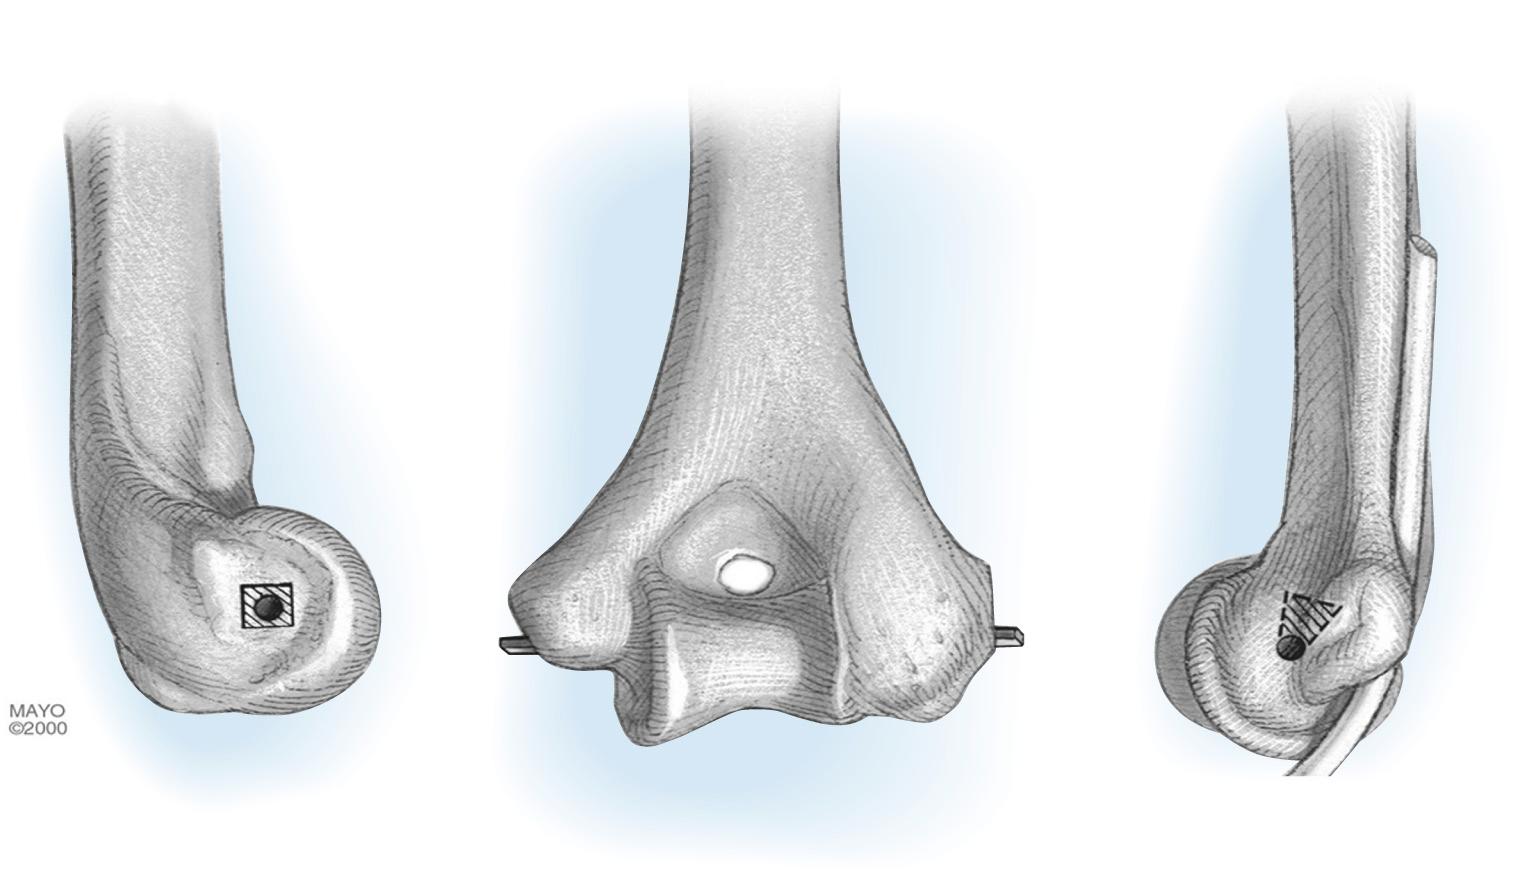 FIG 3.1, Configuration and dimensions of the locus of the instant center of rotation of the elbow. This axis runs through the center of the articular surface, as viewed on the anteroposterior and lateral planes.